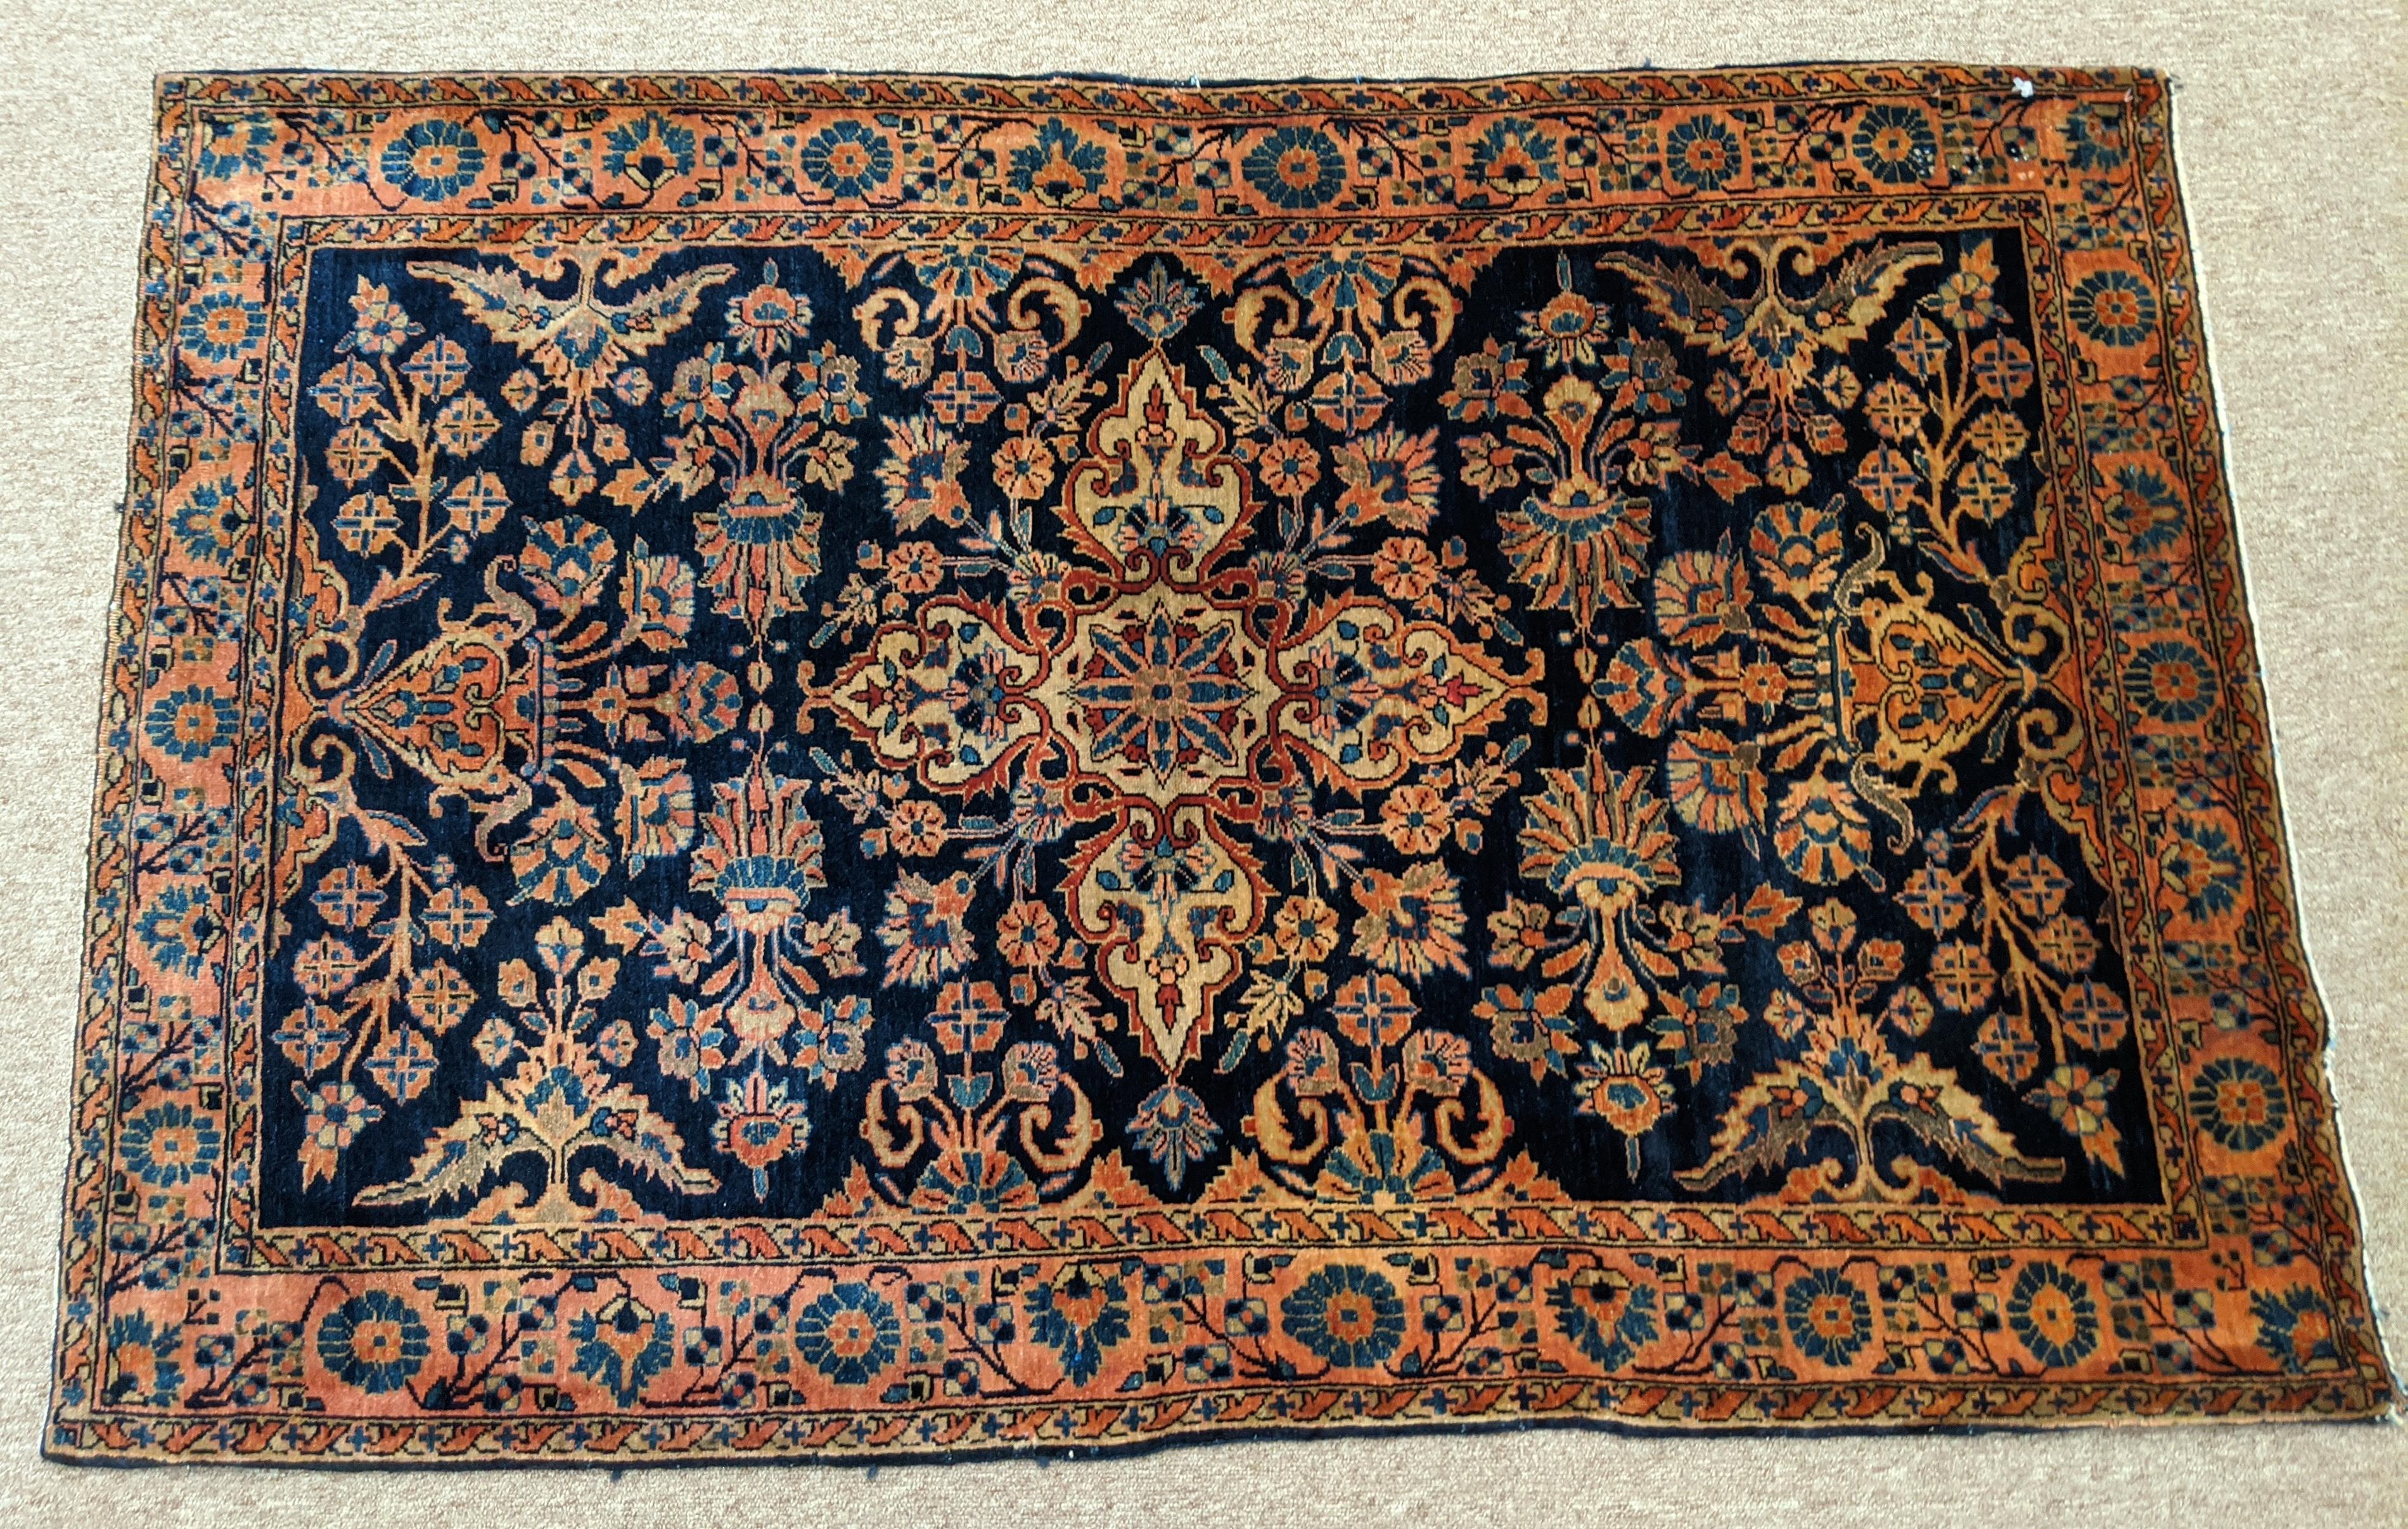 Persian Sarouk with an all-over field design with a navy background and a rust border. The field is decorated with vines, tendrills and flowers in light blue, gold and teal. The wool is so soft that it feels like silk. It is a 3-4x5-1 and is circa